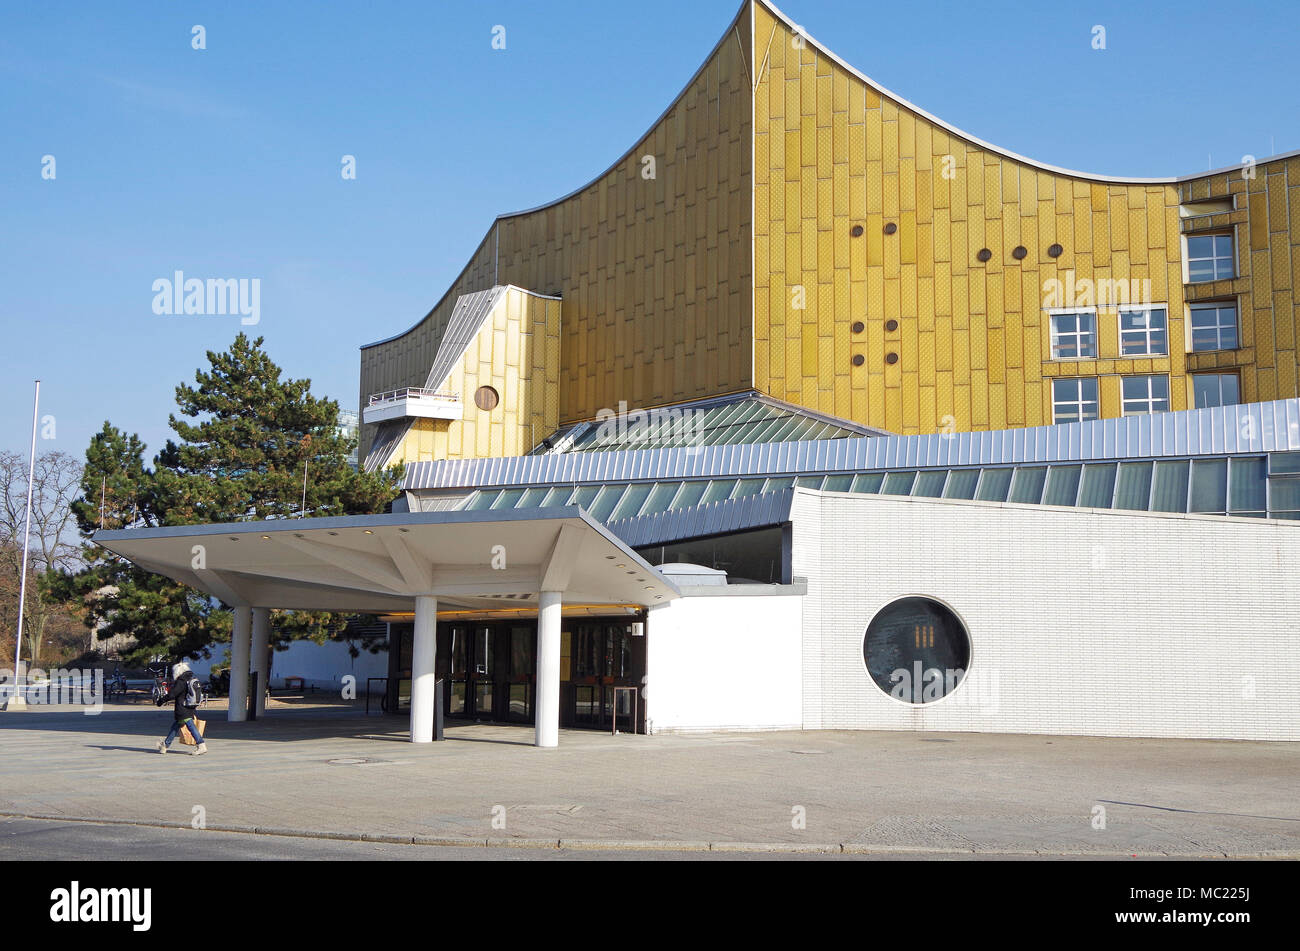 The Berliner Philharmonie concert hall, home to the Berlin Philharmonic Orchestra, architect Hans Scharoun, Main entrance & main concert hall Stock Photo